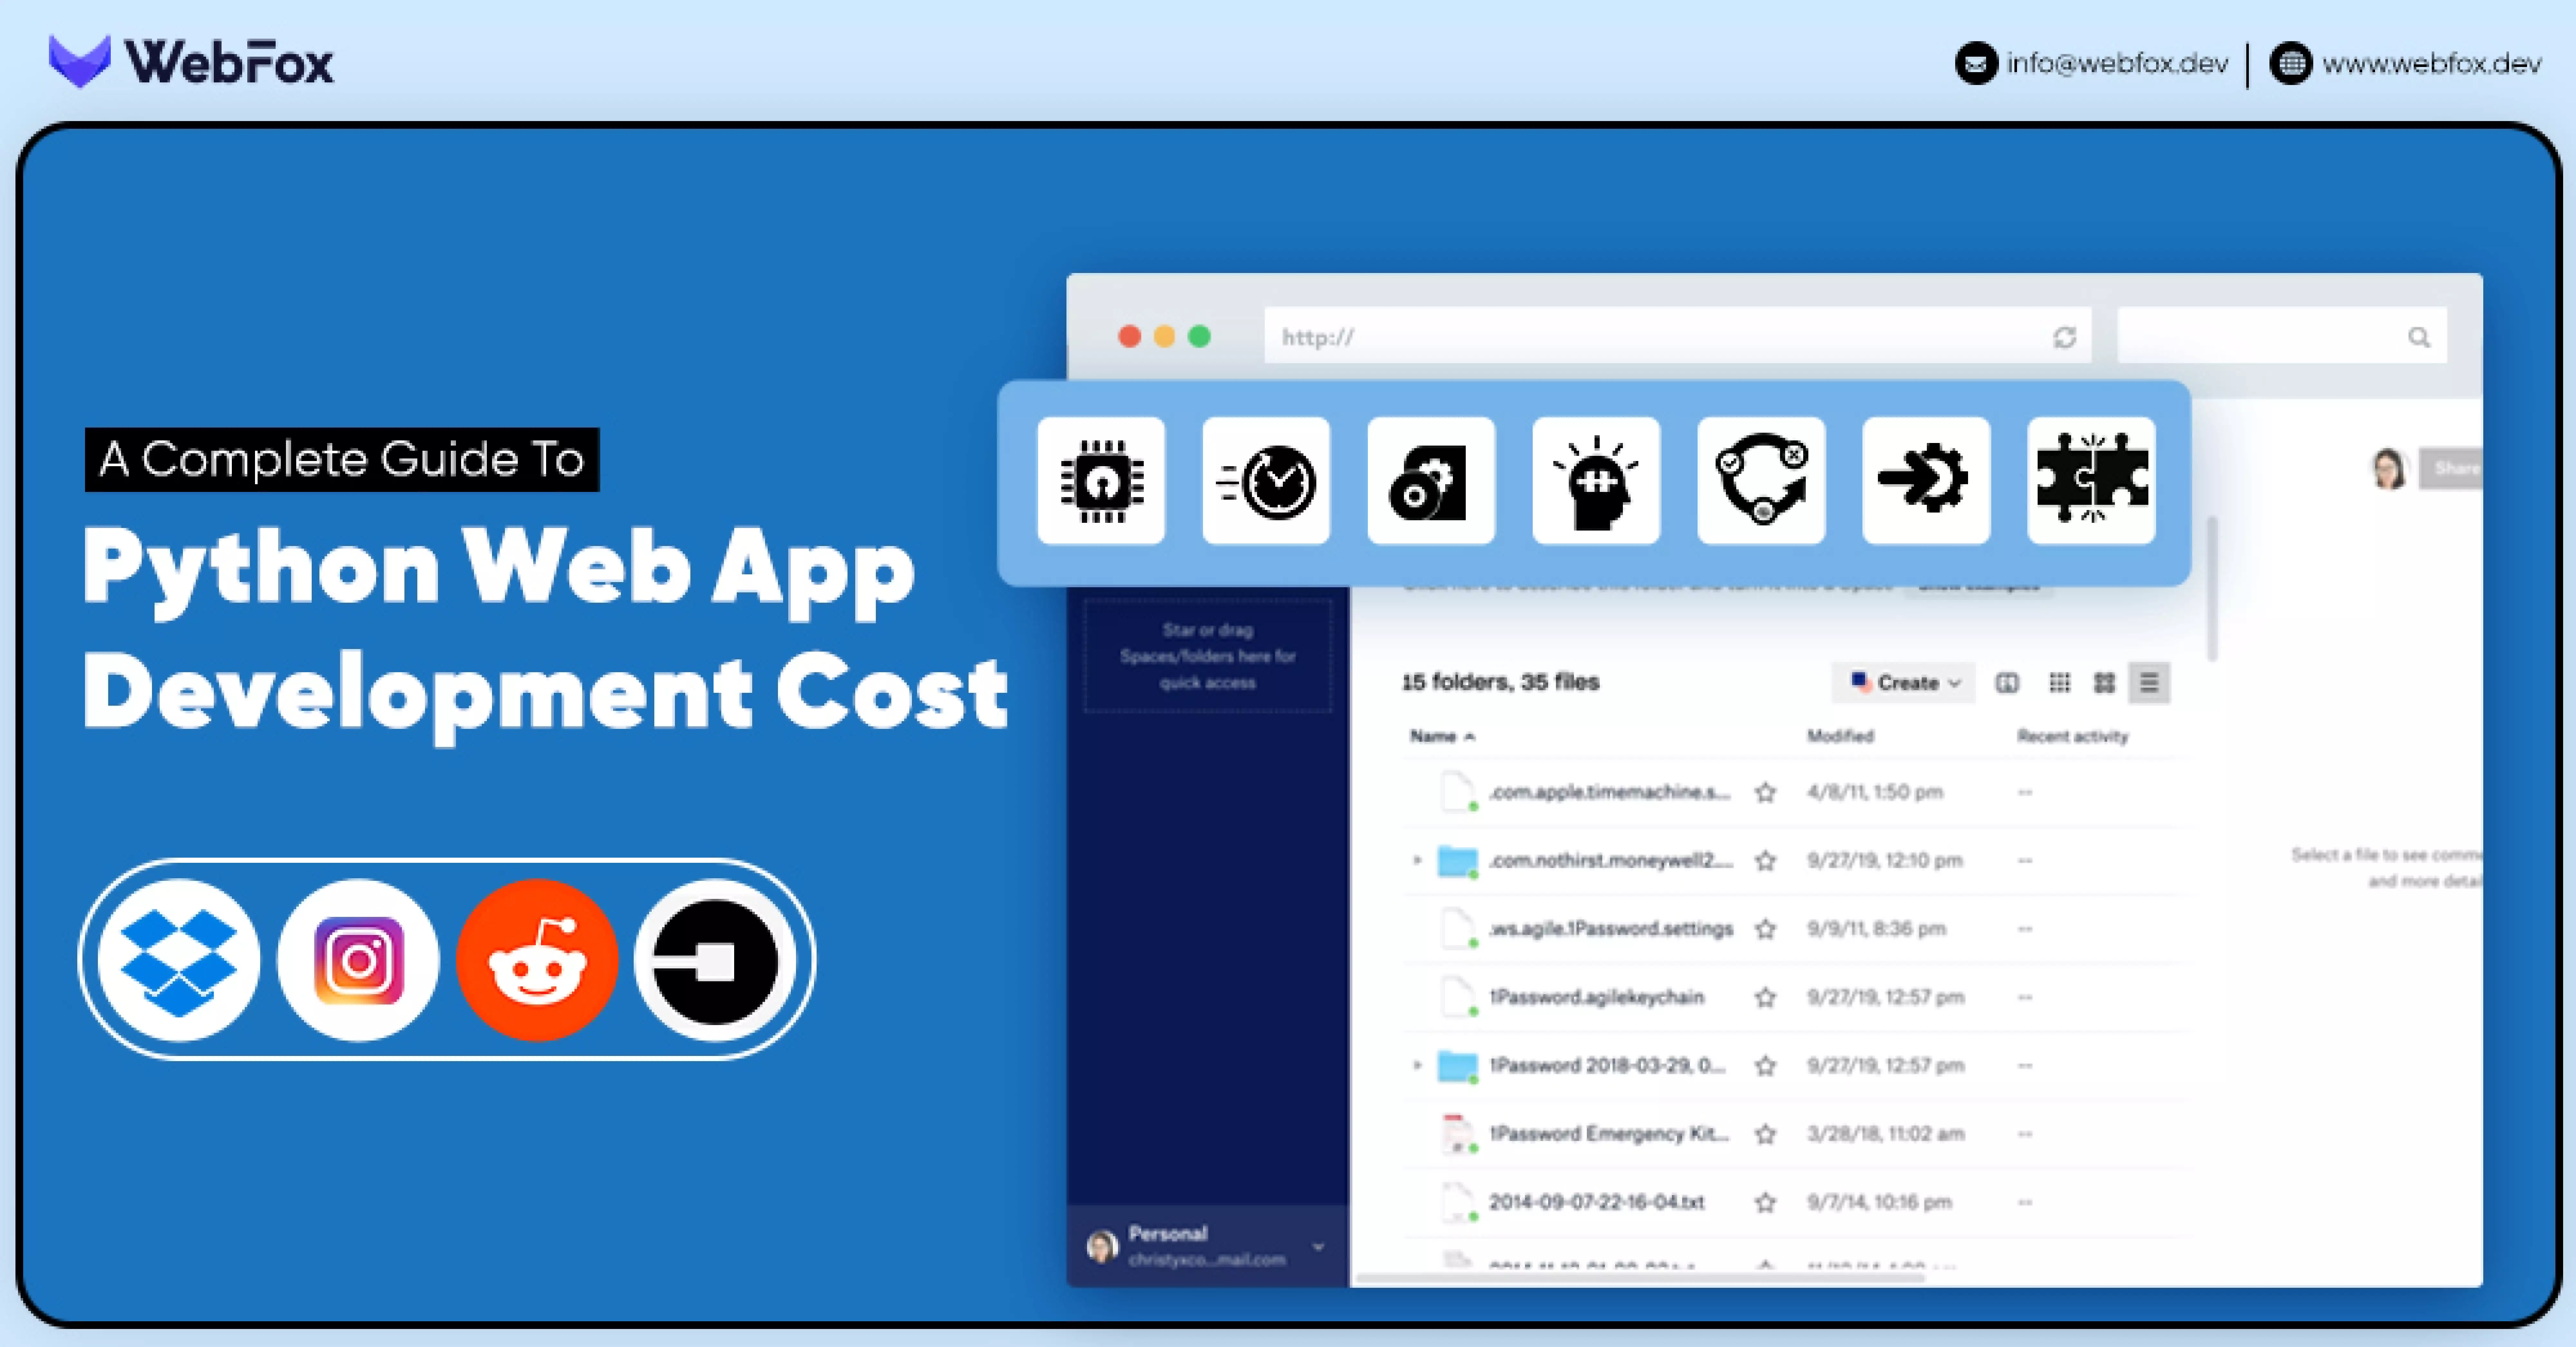 A Complete Guide To Python Web App Development Cost